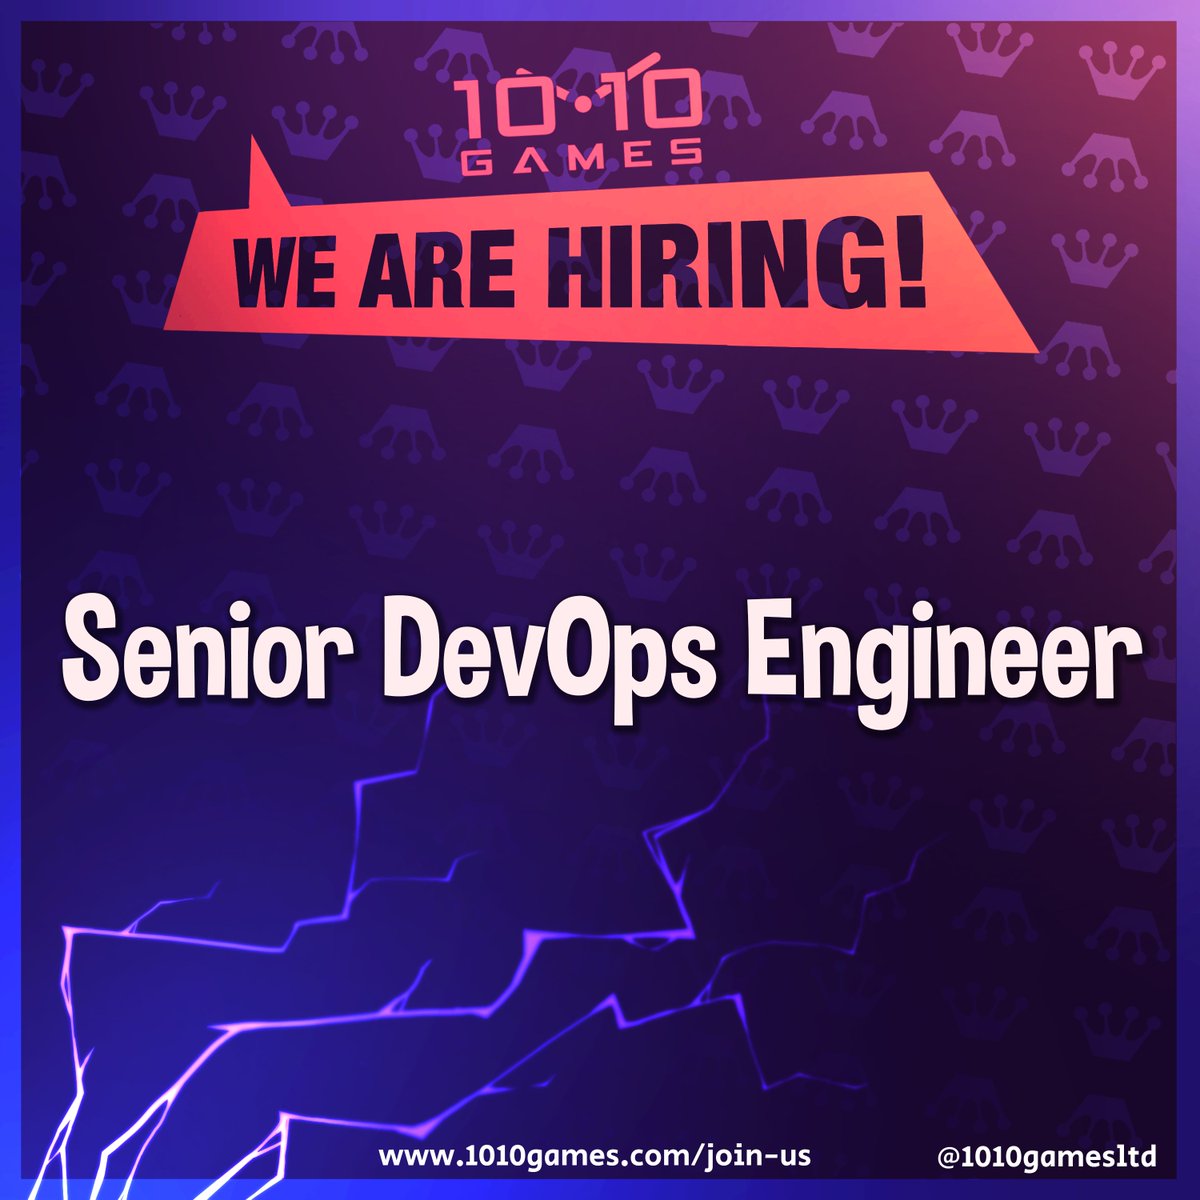 🔥NEW ROLE: SENIOR DEV OPS ENGINEER🔥

We are looking for a Senior DevOps Engineer to join 10:10 Games! Working with our Technical Director, you will steer development and mentor programmers within the DevOps team! 💻 🎮#GameJobs #Hiring 

Apply Here:
1010games.bamboohr.com/careers/69?sou…